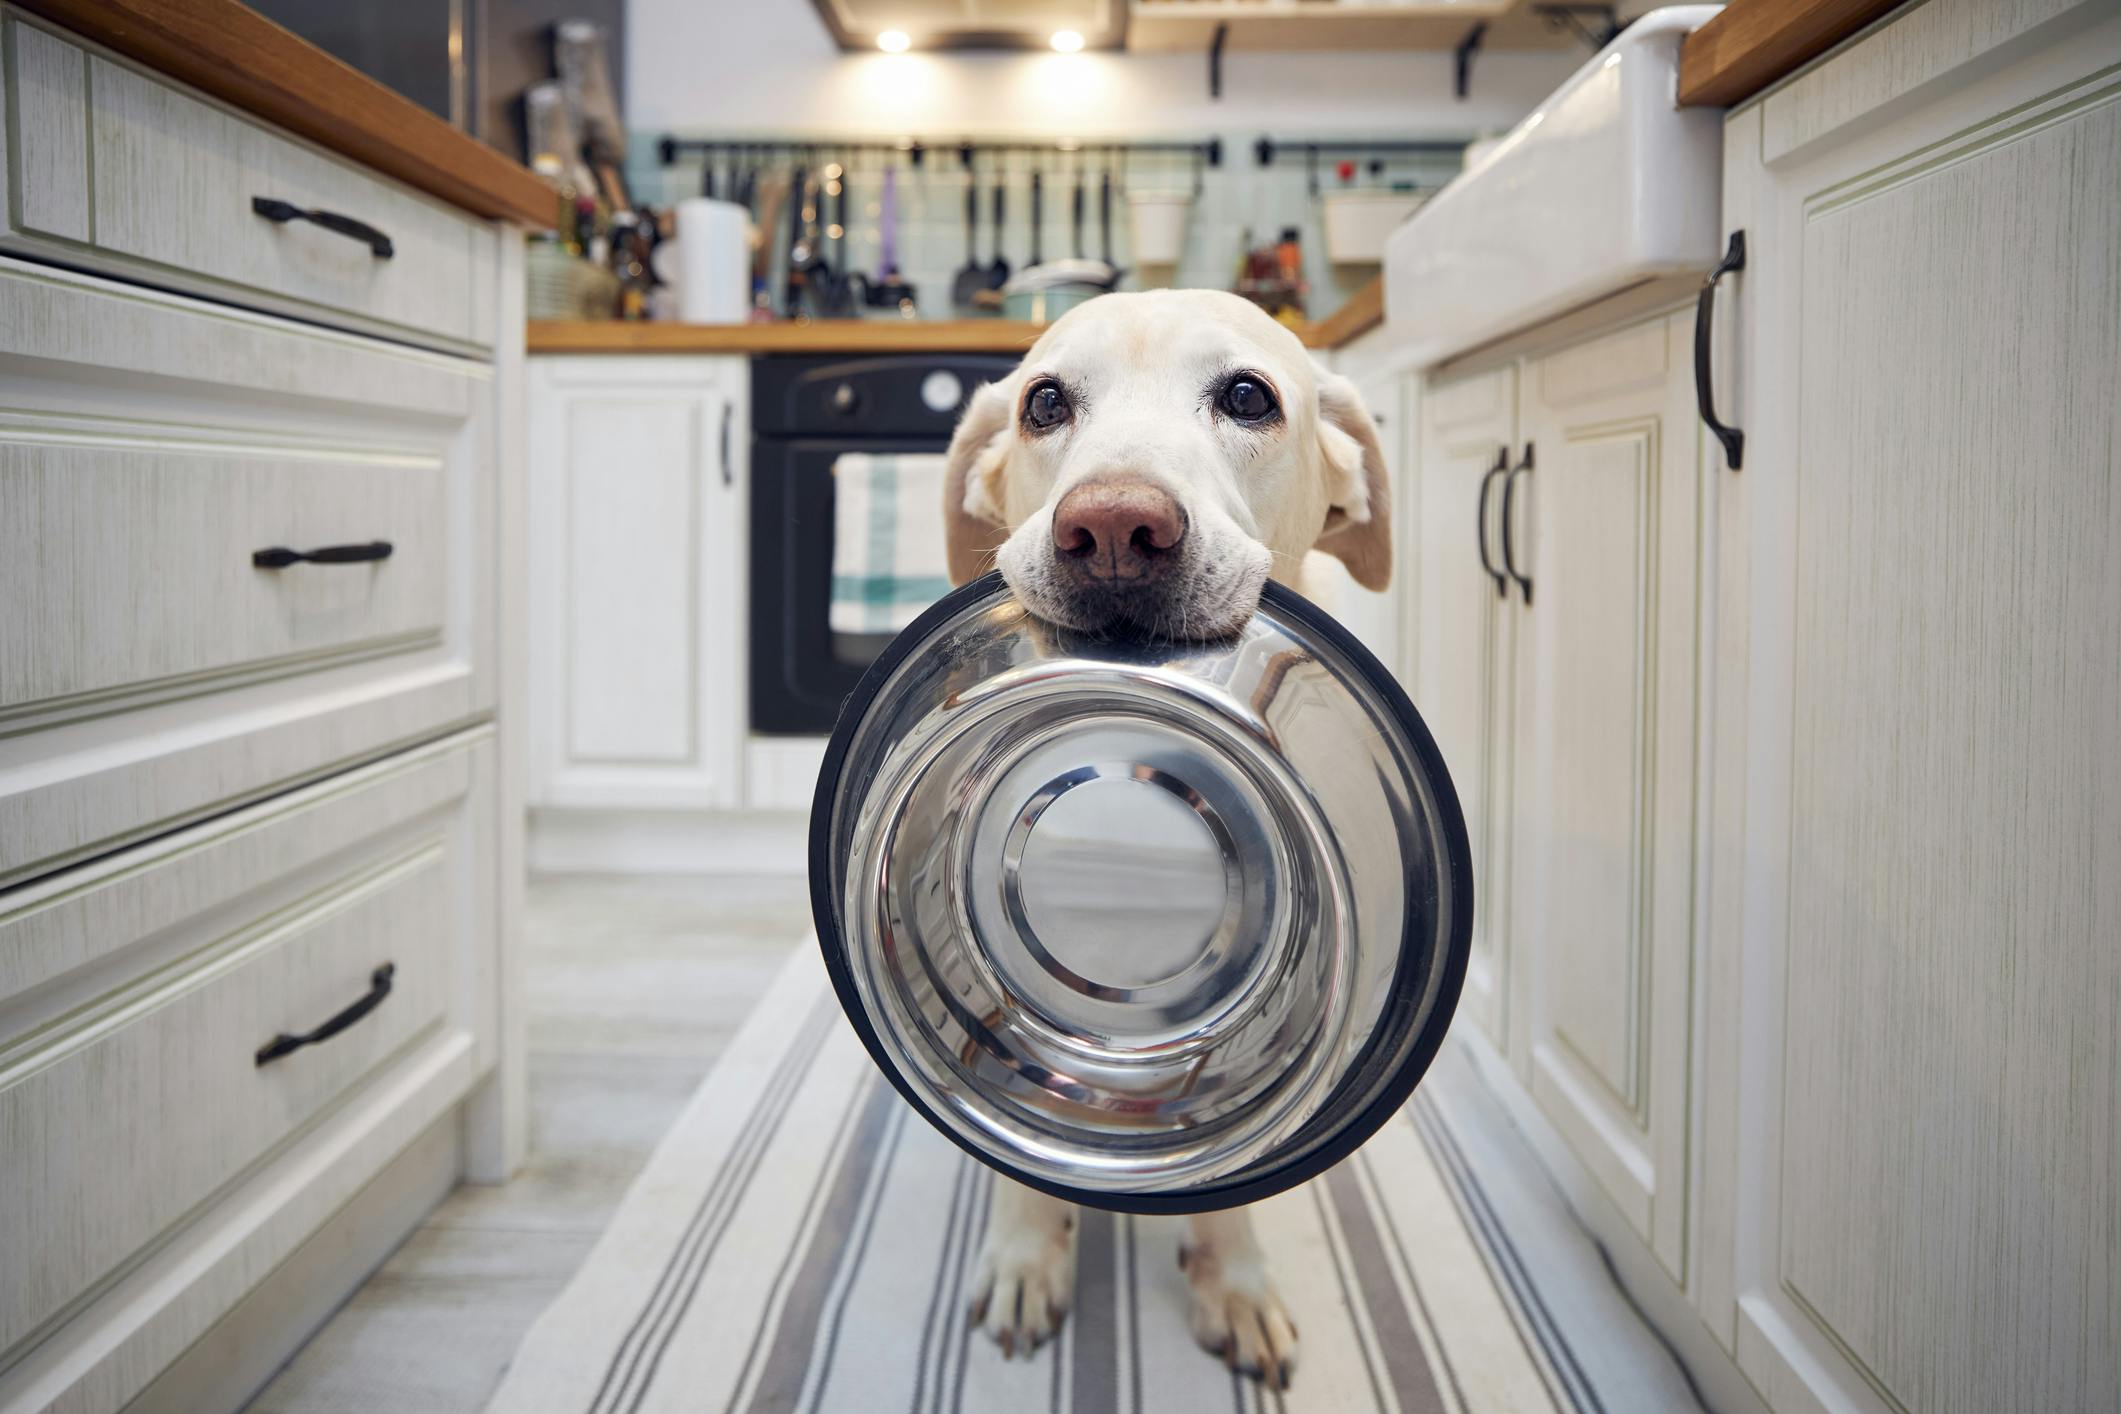 Dog standing in the kitchen holding a food bowl in their mouth.